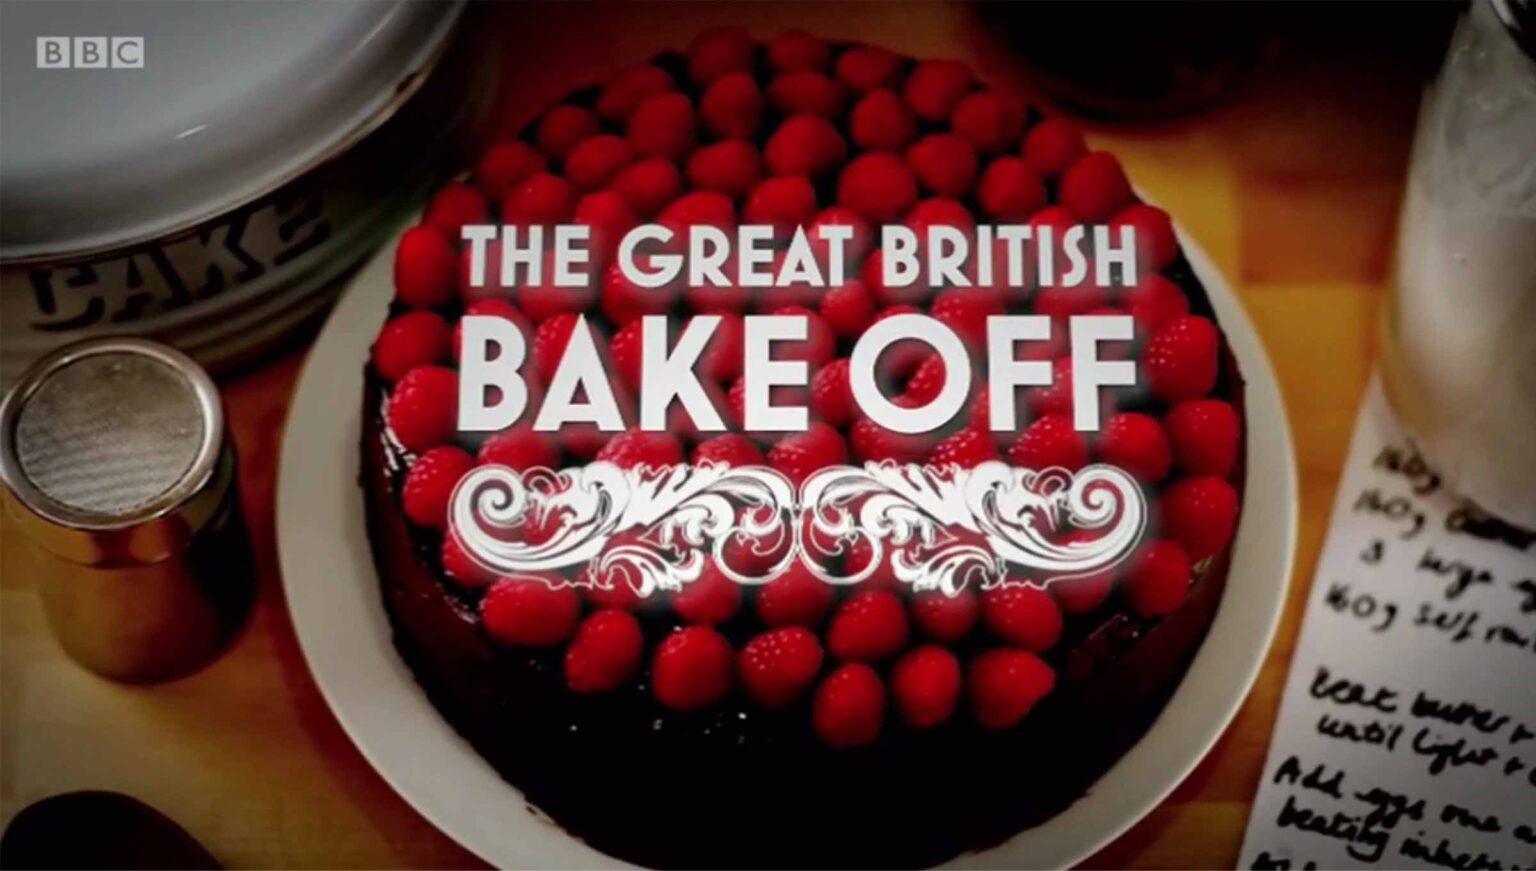 Are you beyond ready to see the latest creations on 'The Great British Baking Show'? Check out these relatable memes before the new series airs.